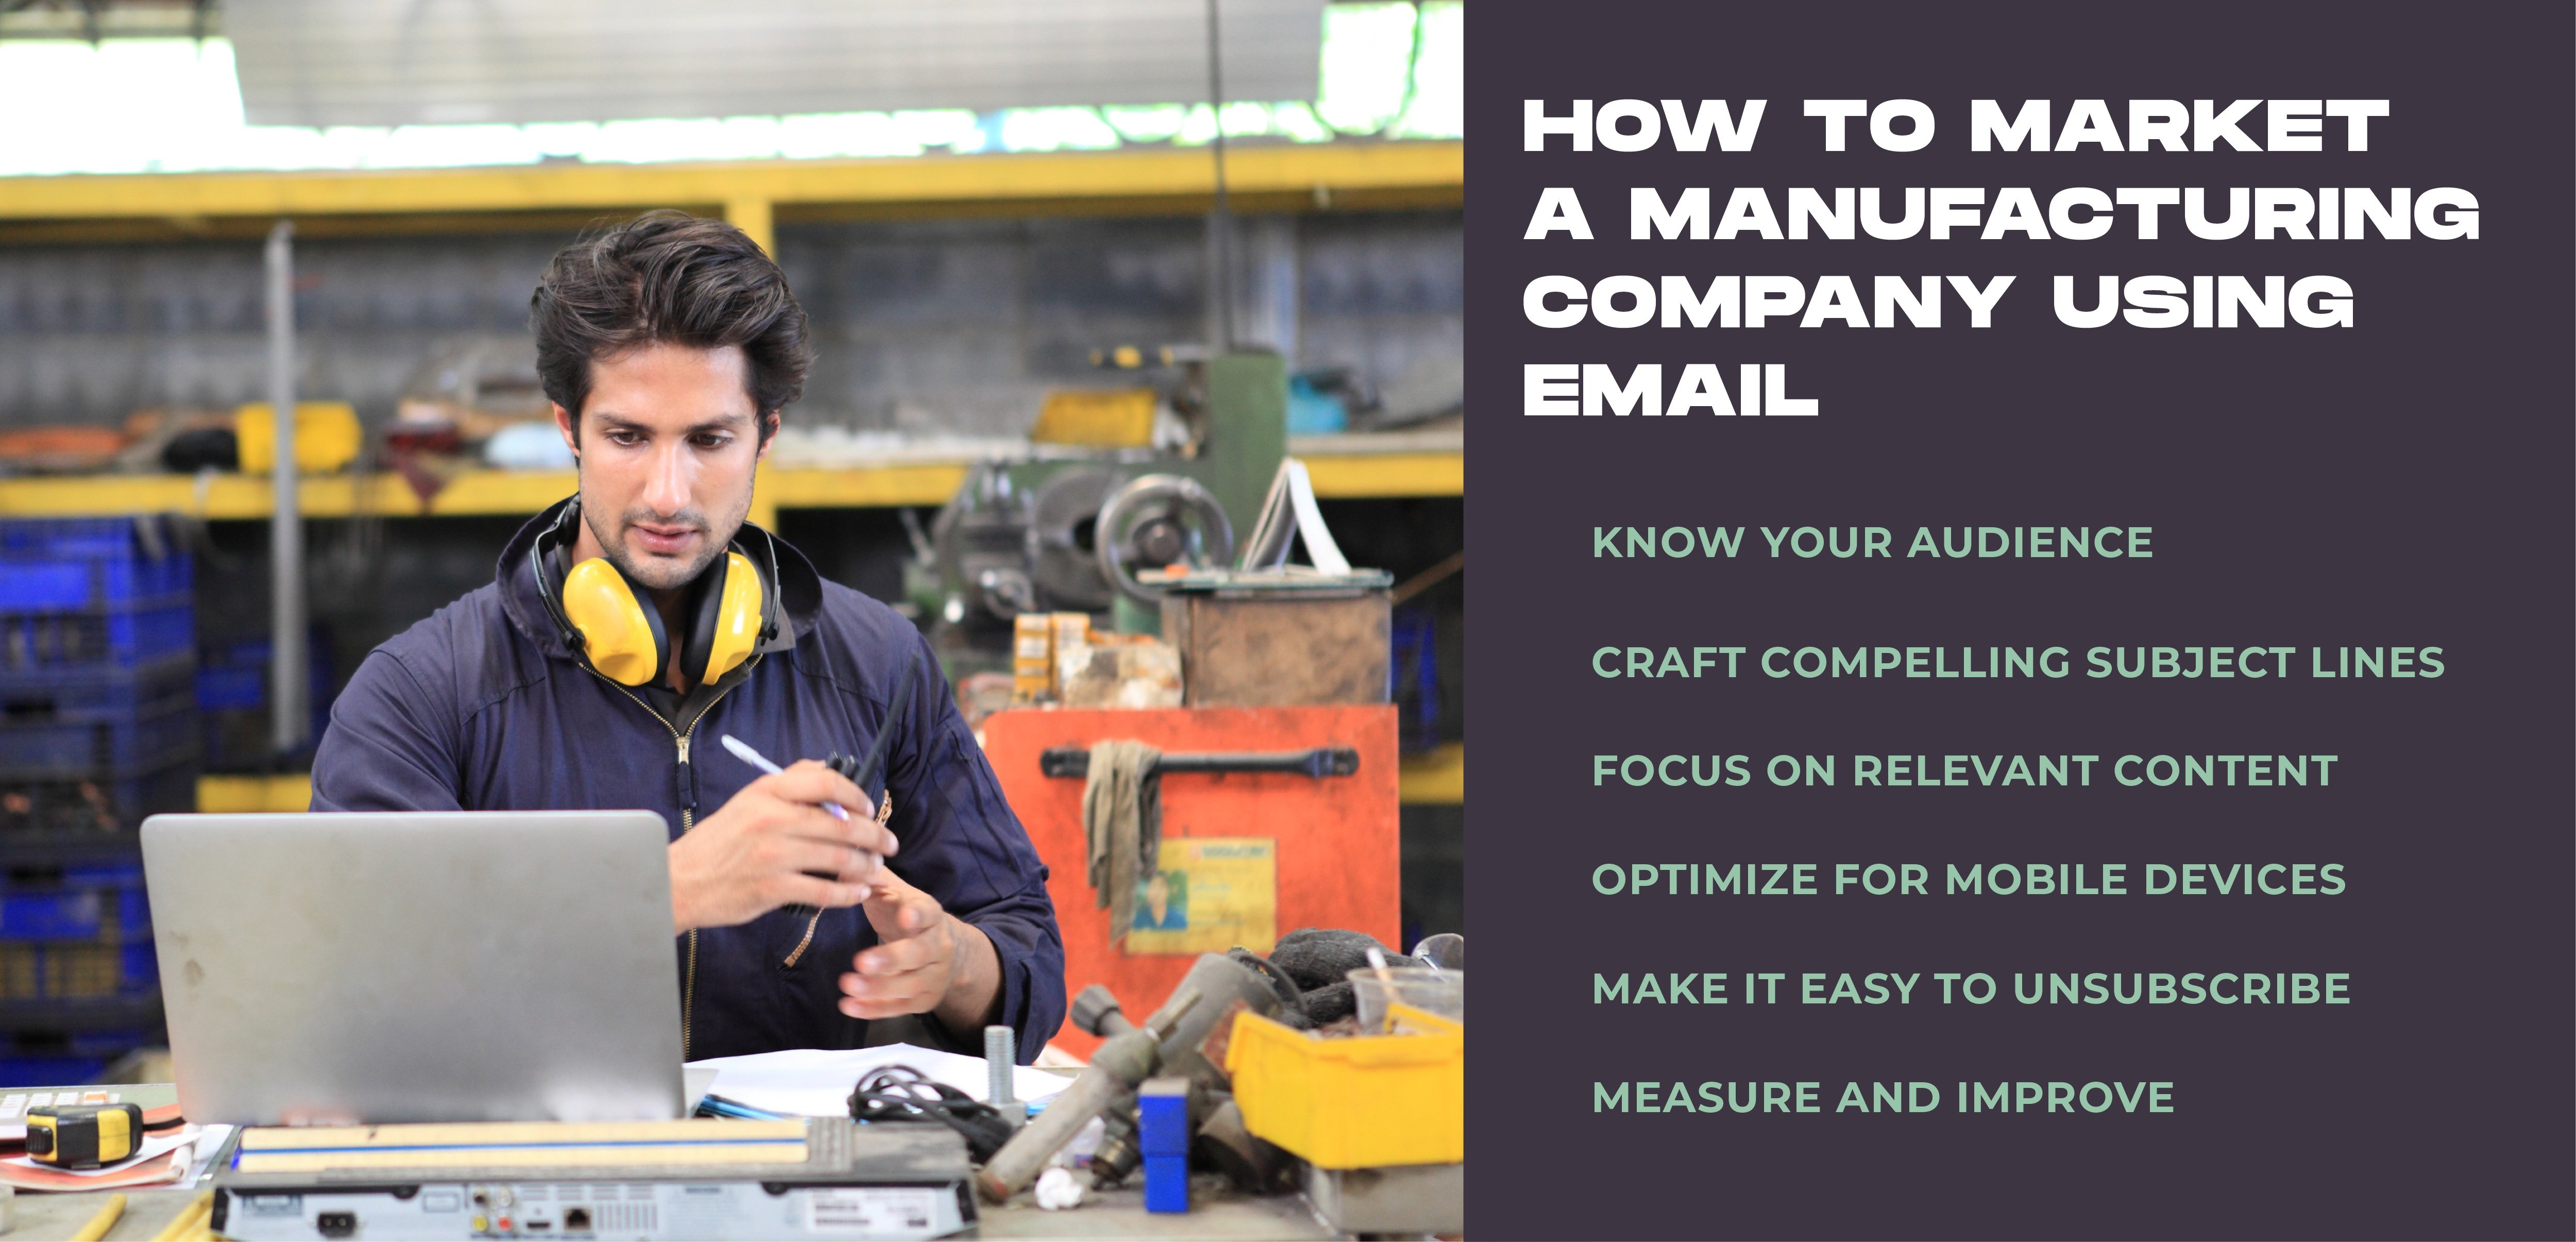 Email Marketing Tips for the Manufacturing Industry_How To